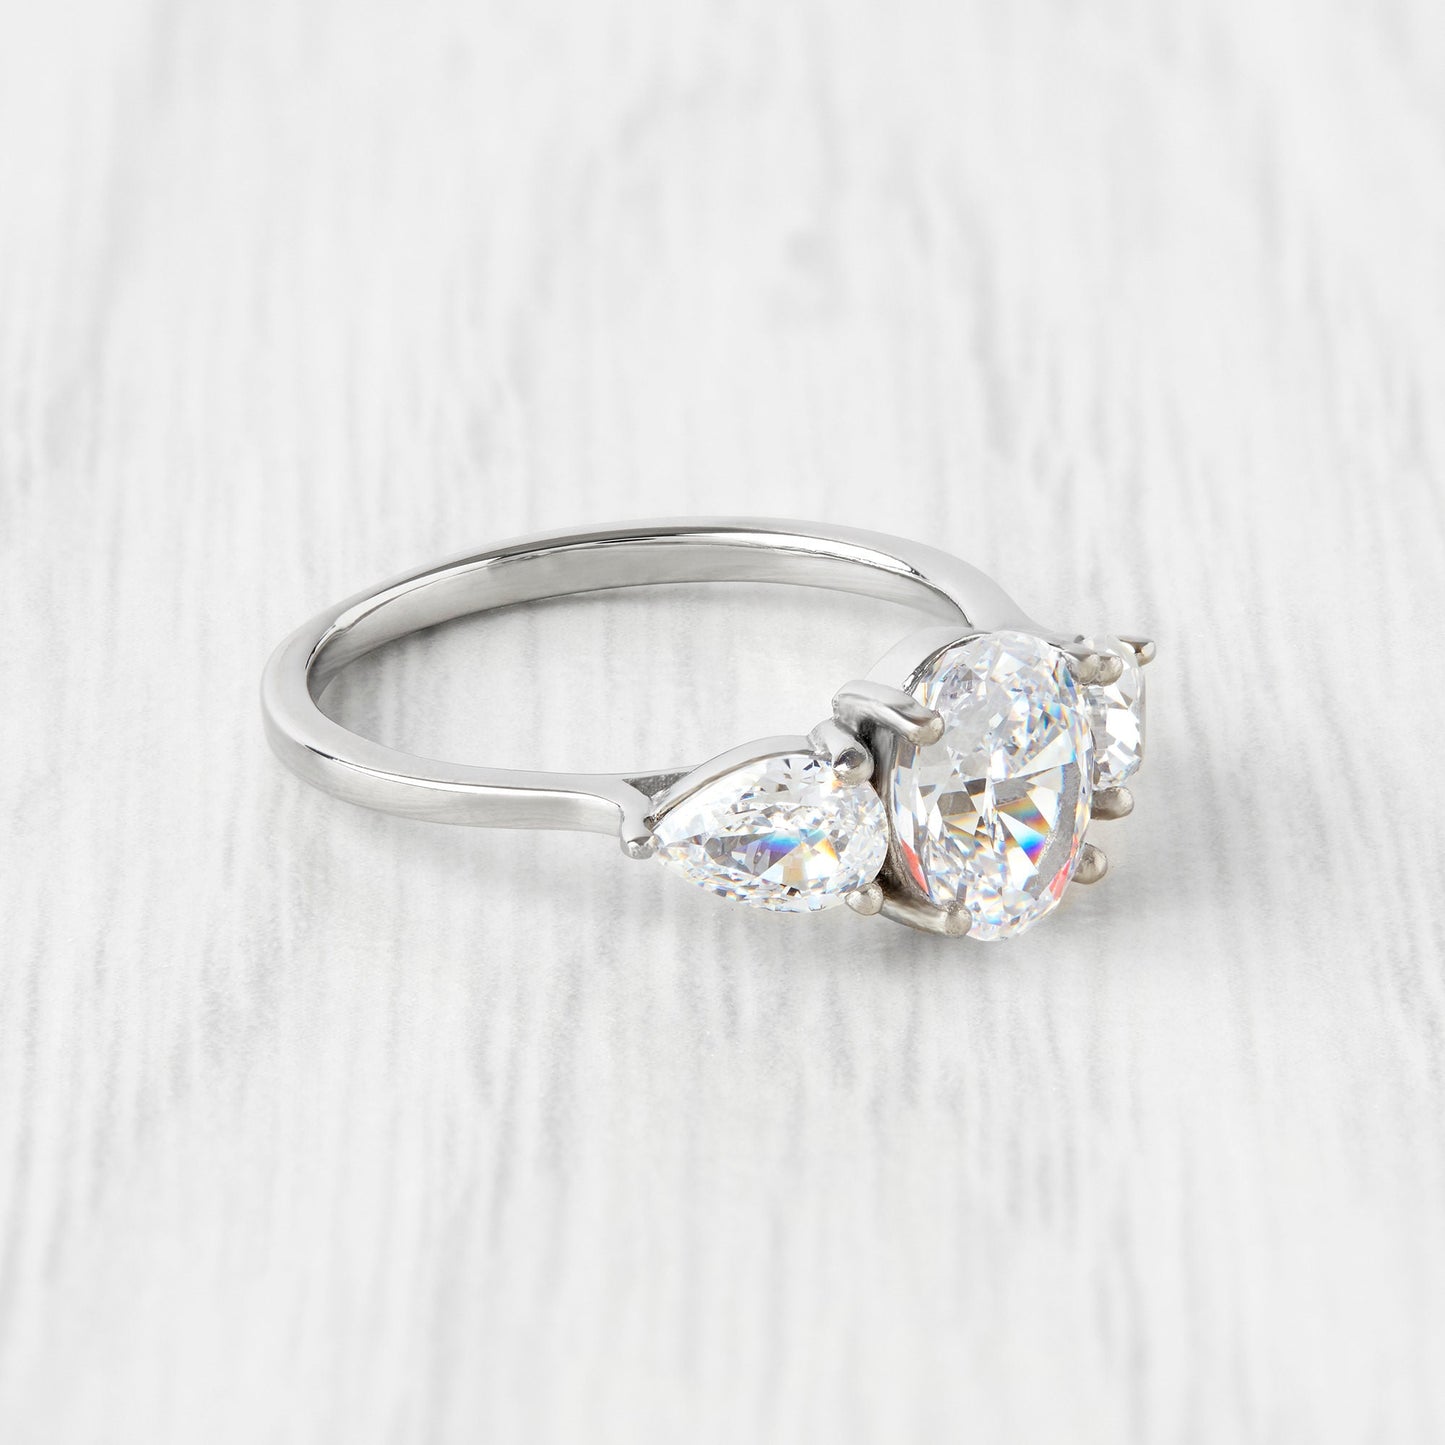 CRUSHED ICE CUT Genuine moissanite Oval & pear cut 3 stone Trilogy Ring in White Gold or Titanium  - engagement ring - handmade ring